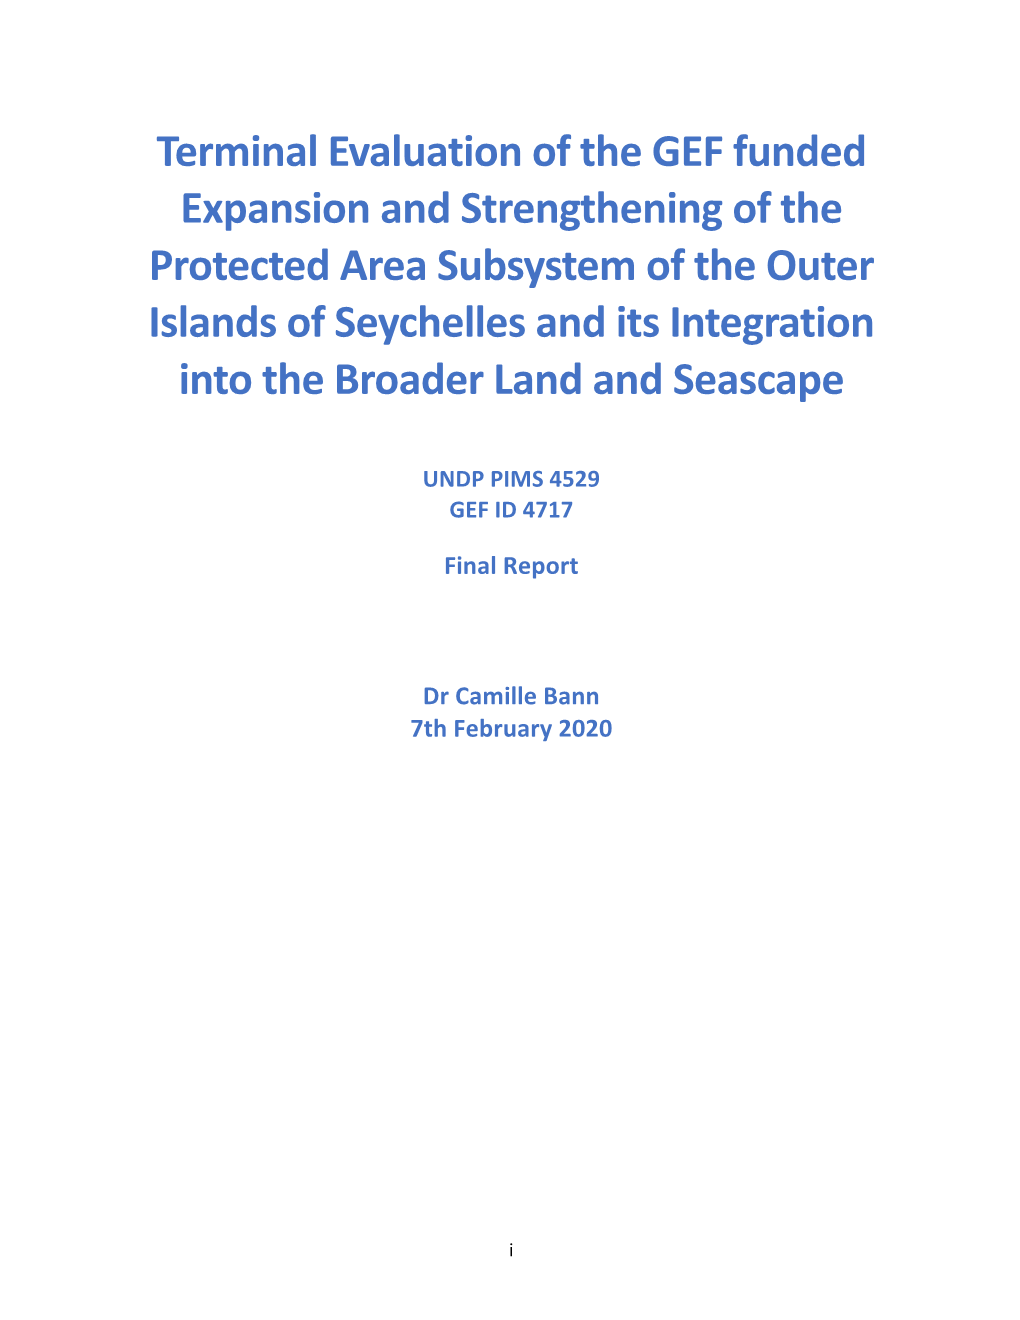 Terminal Evaluation of the GEF Funded Expansion And